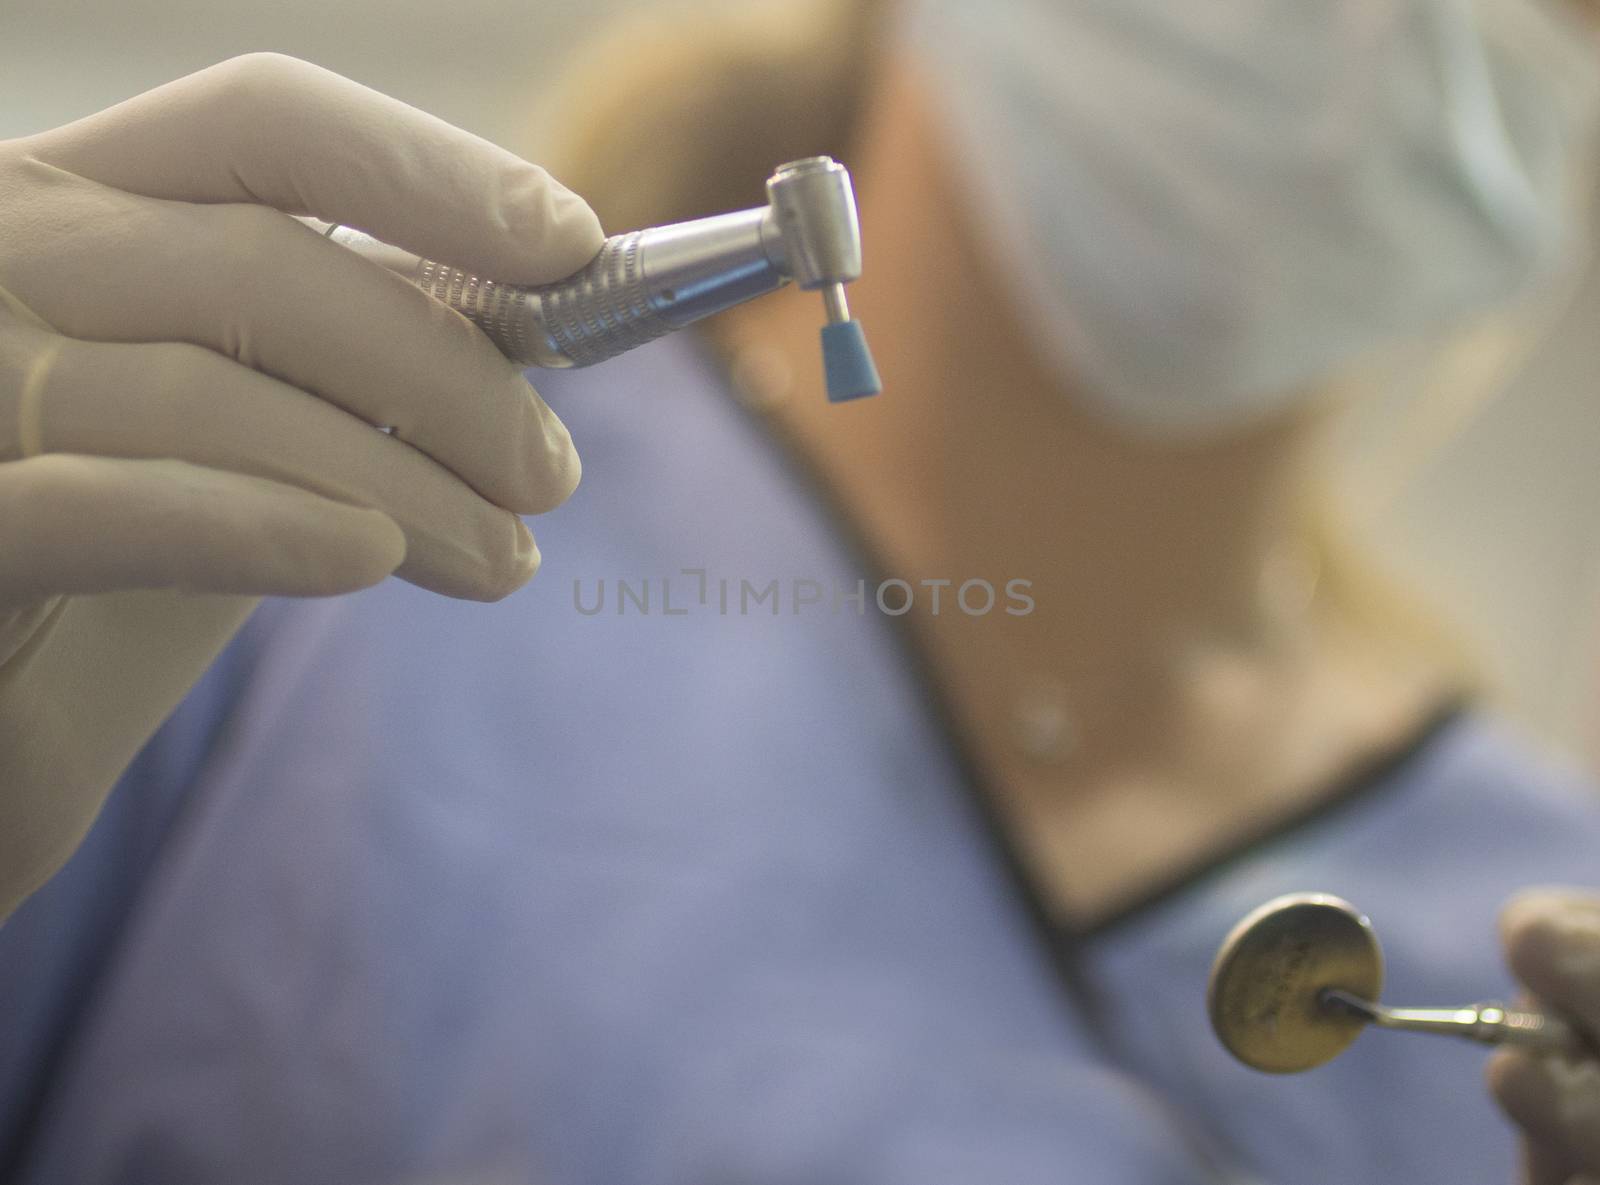 Dental instrumentation dentist pick tooth dental cleaning tool in the hand of dentist wearing face mask in dentists surgery clinic artistic color photo with shallow depth of focus.